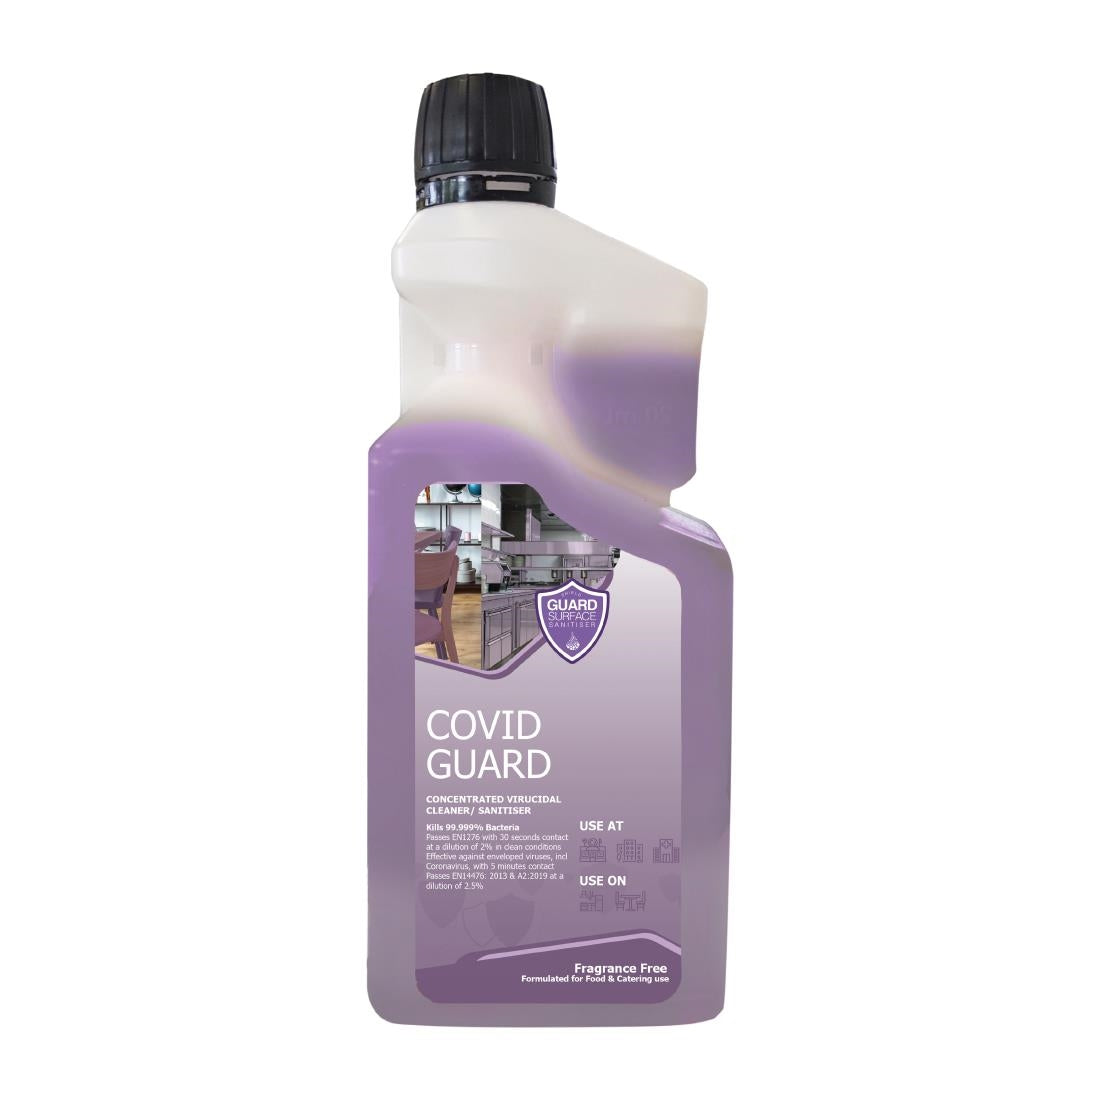 Covid Guard Virucidal Fragrance Free Concentrate 6x1Litre